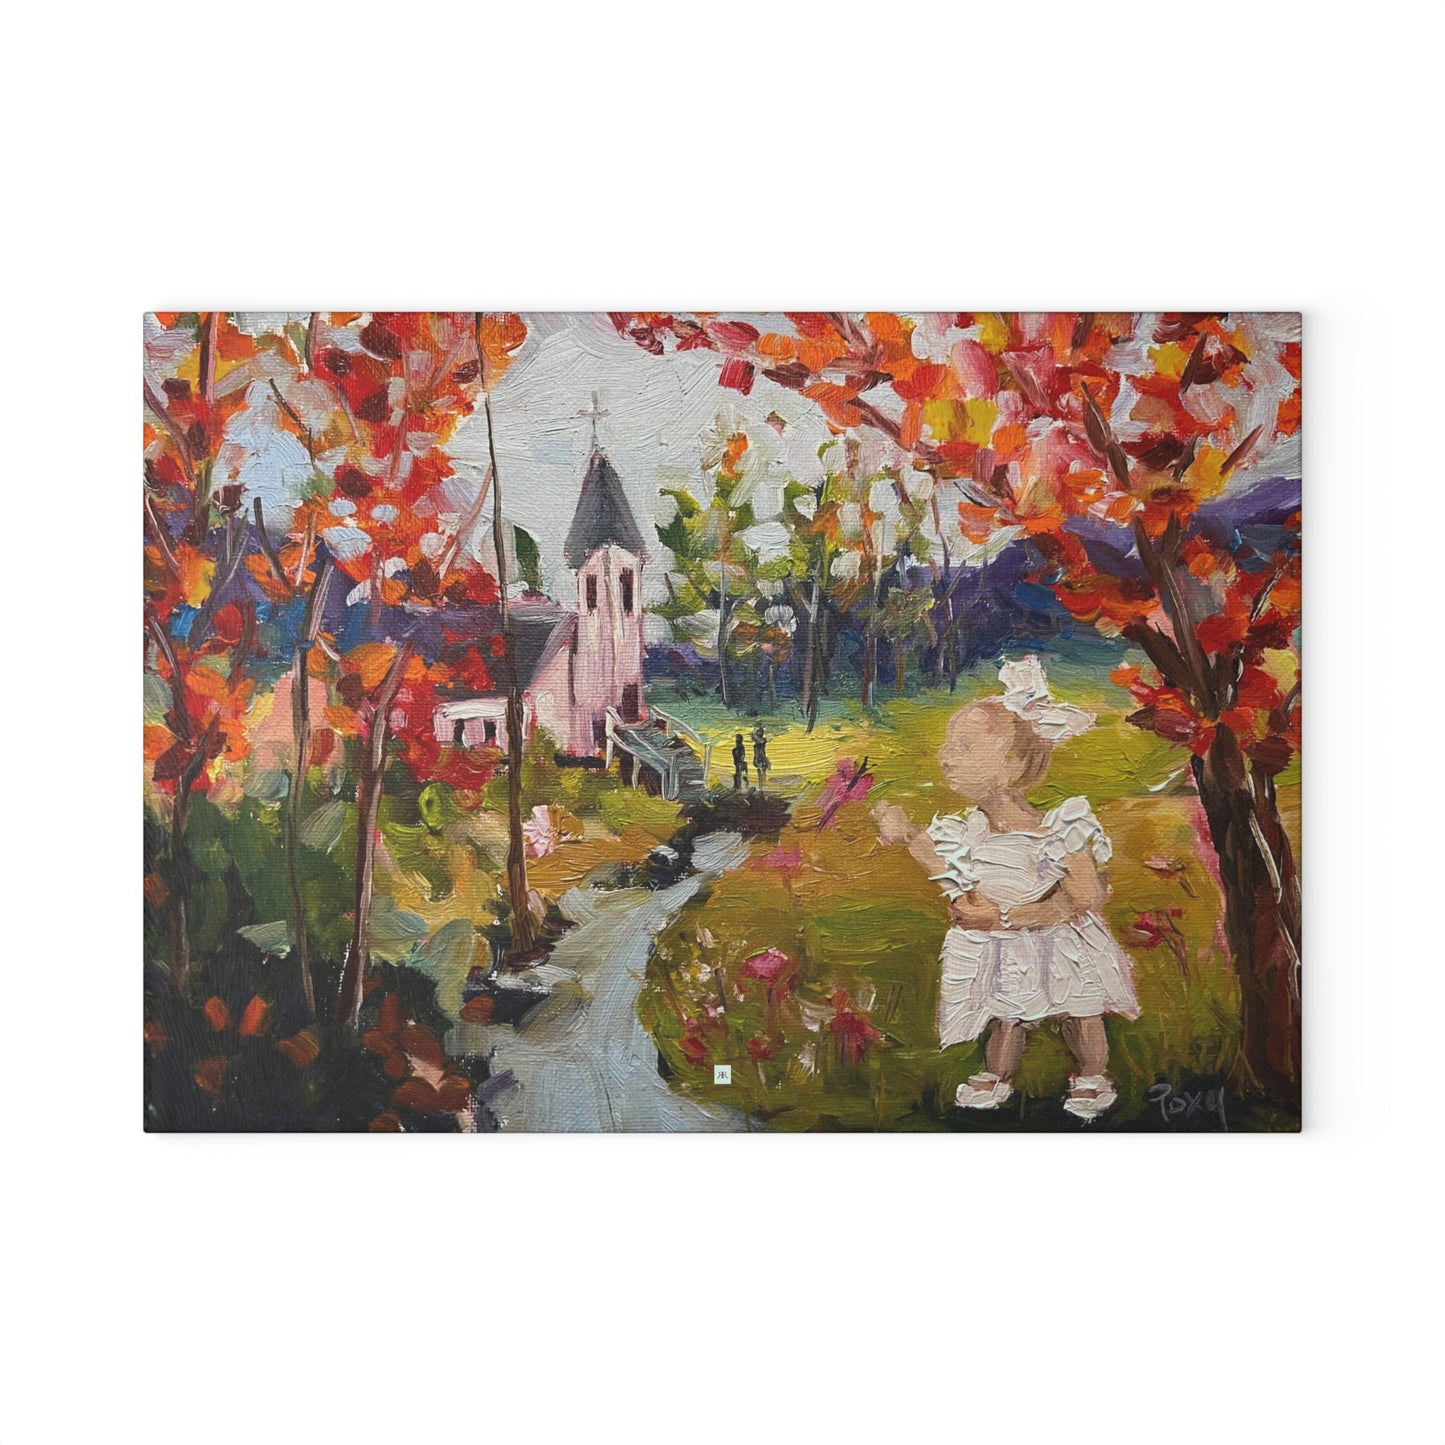 Isla at the Baptism (Rural Church Landscape with Toddler) Glass Cutting Board